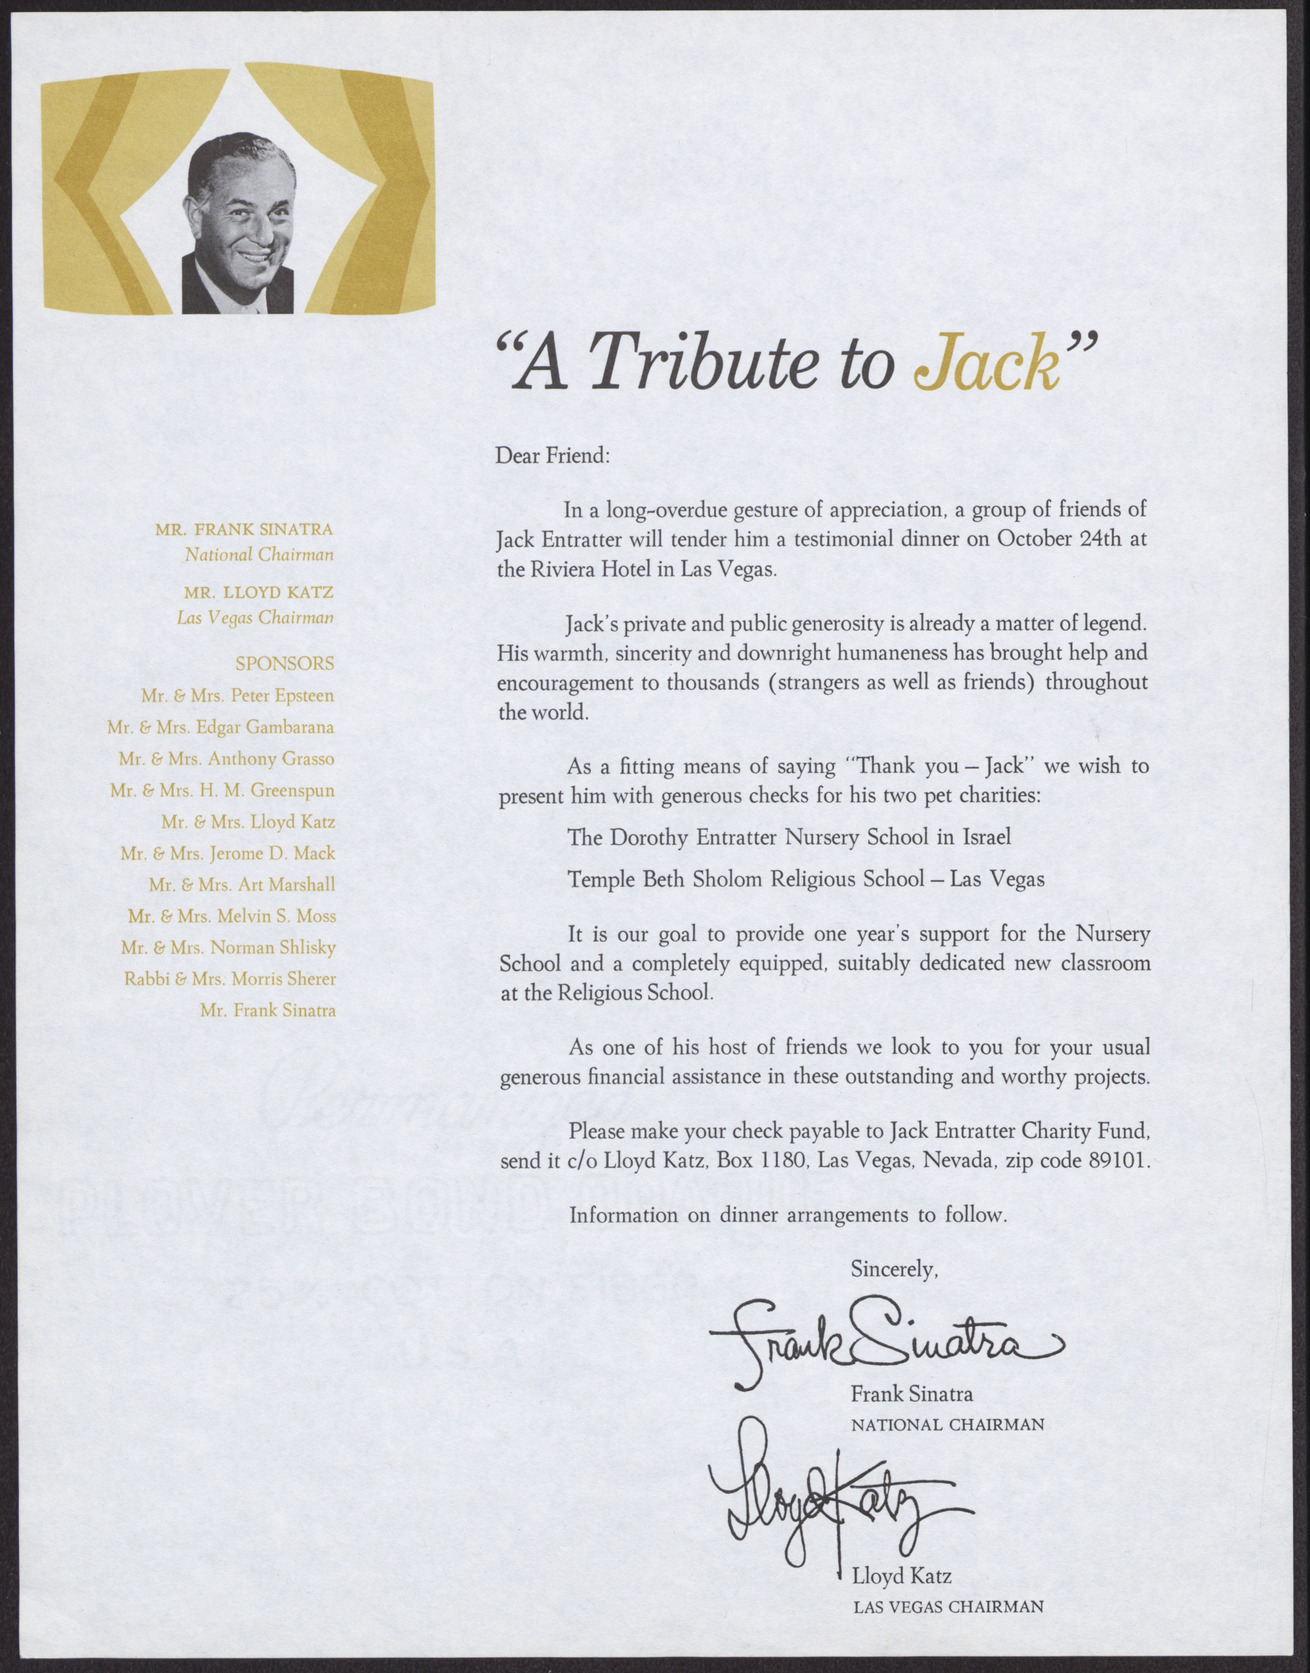 Letter from Frank Sinatra and Lloyd Katz (Las Vegas, Nev.) to friends of Jack Entratter, 1965